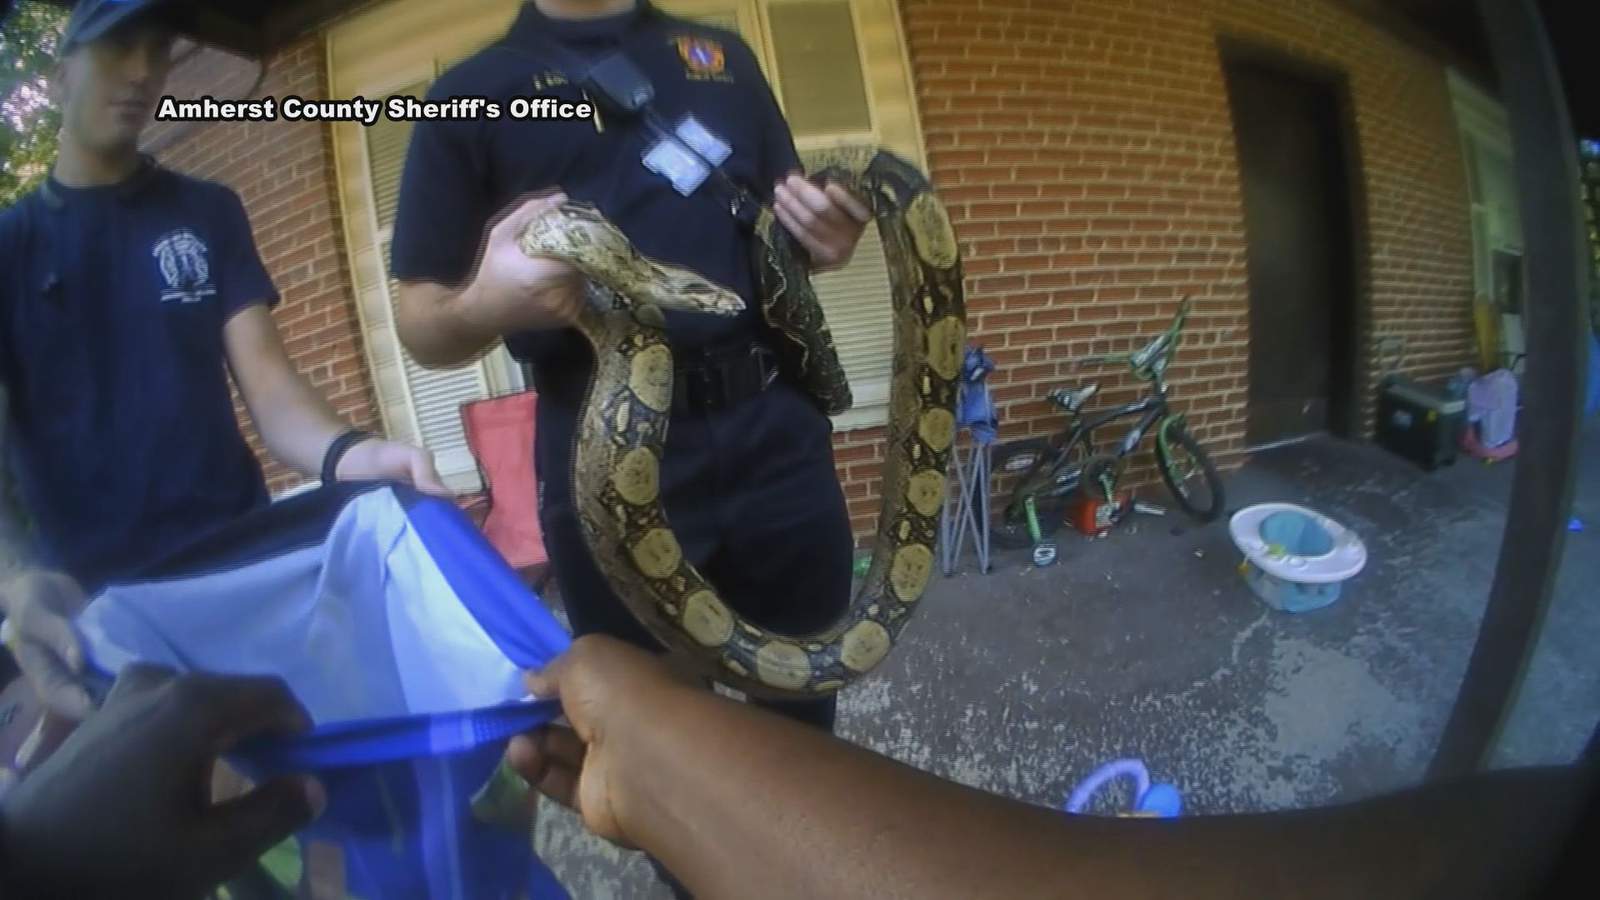 ‘10-4, It’s a python, not a pipe bomb’: 911 call gives Amherst County first responders a slithering surprise